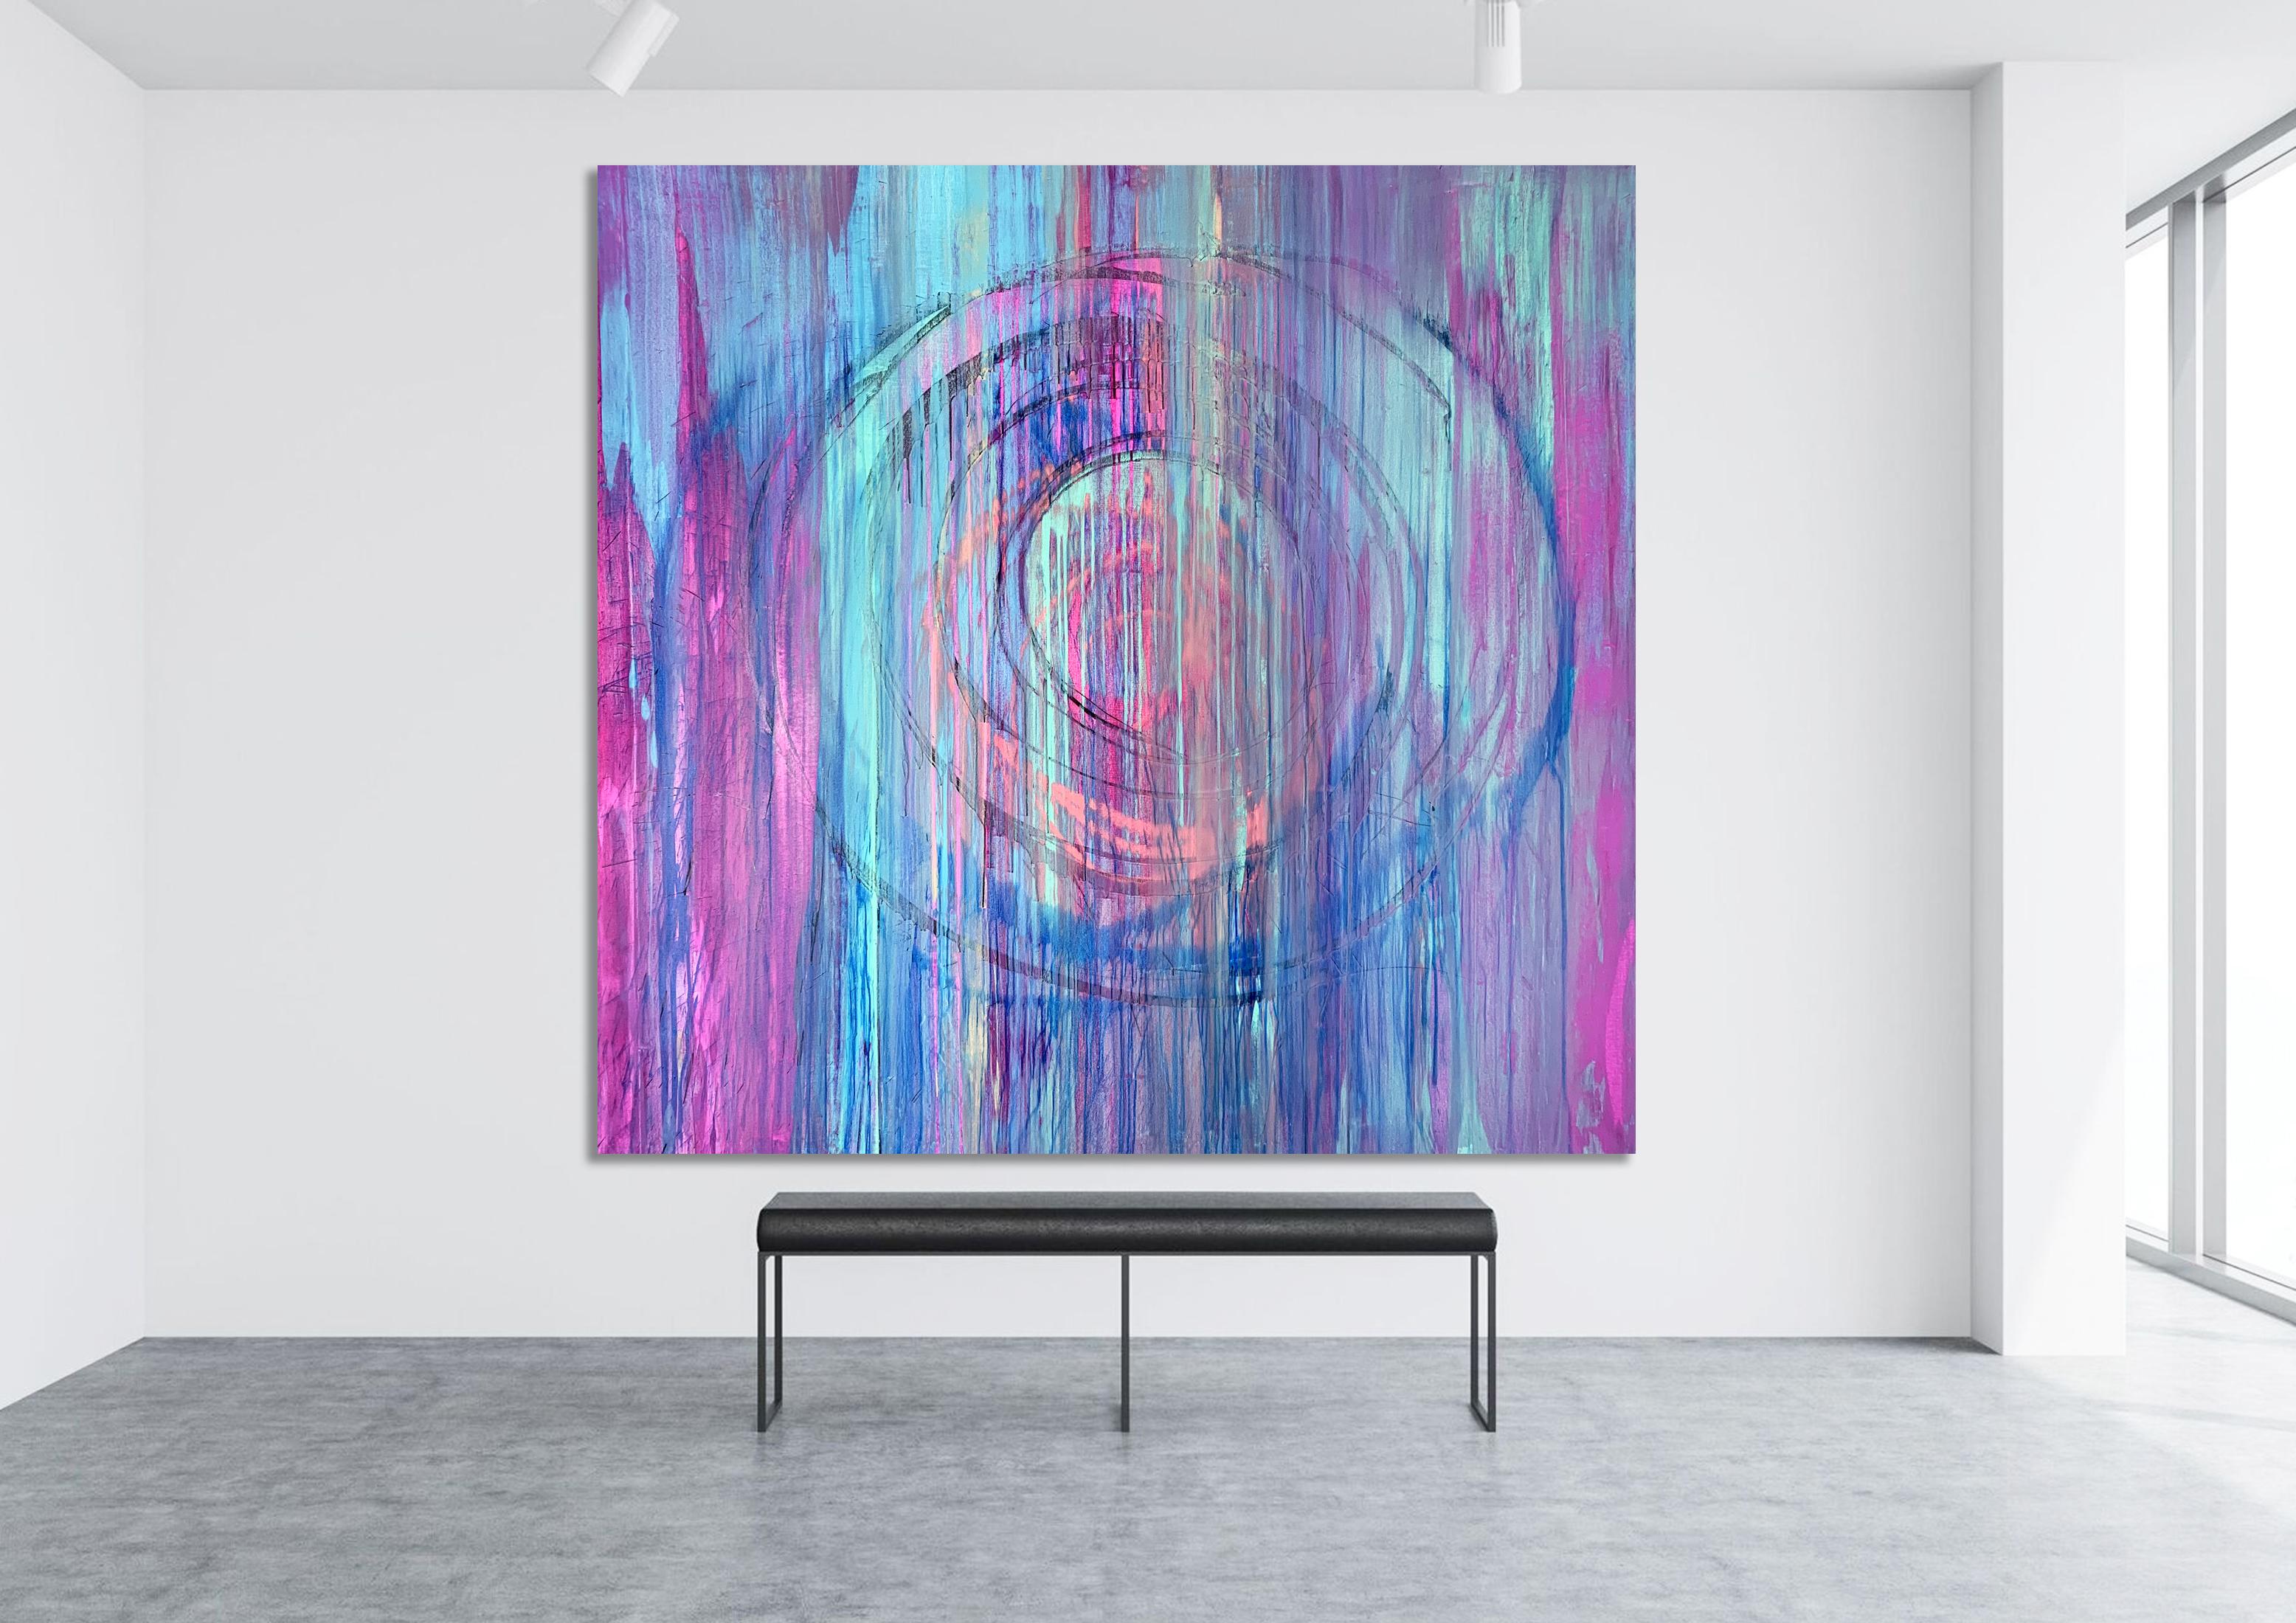 Eclipsed Asymmetry - Painting by Estelle Asmodelle